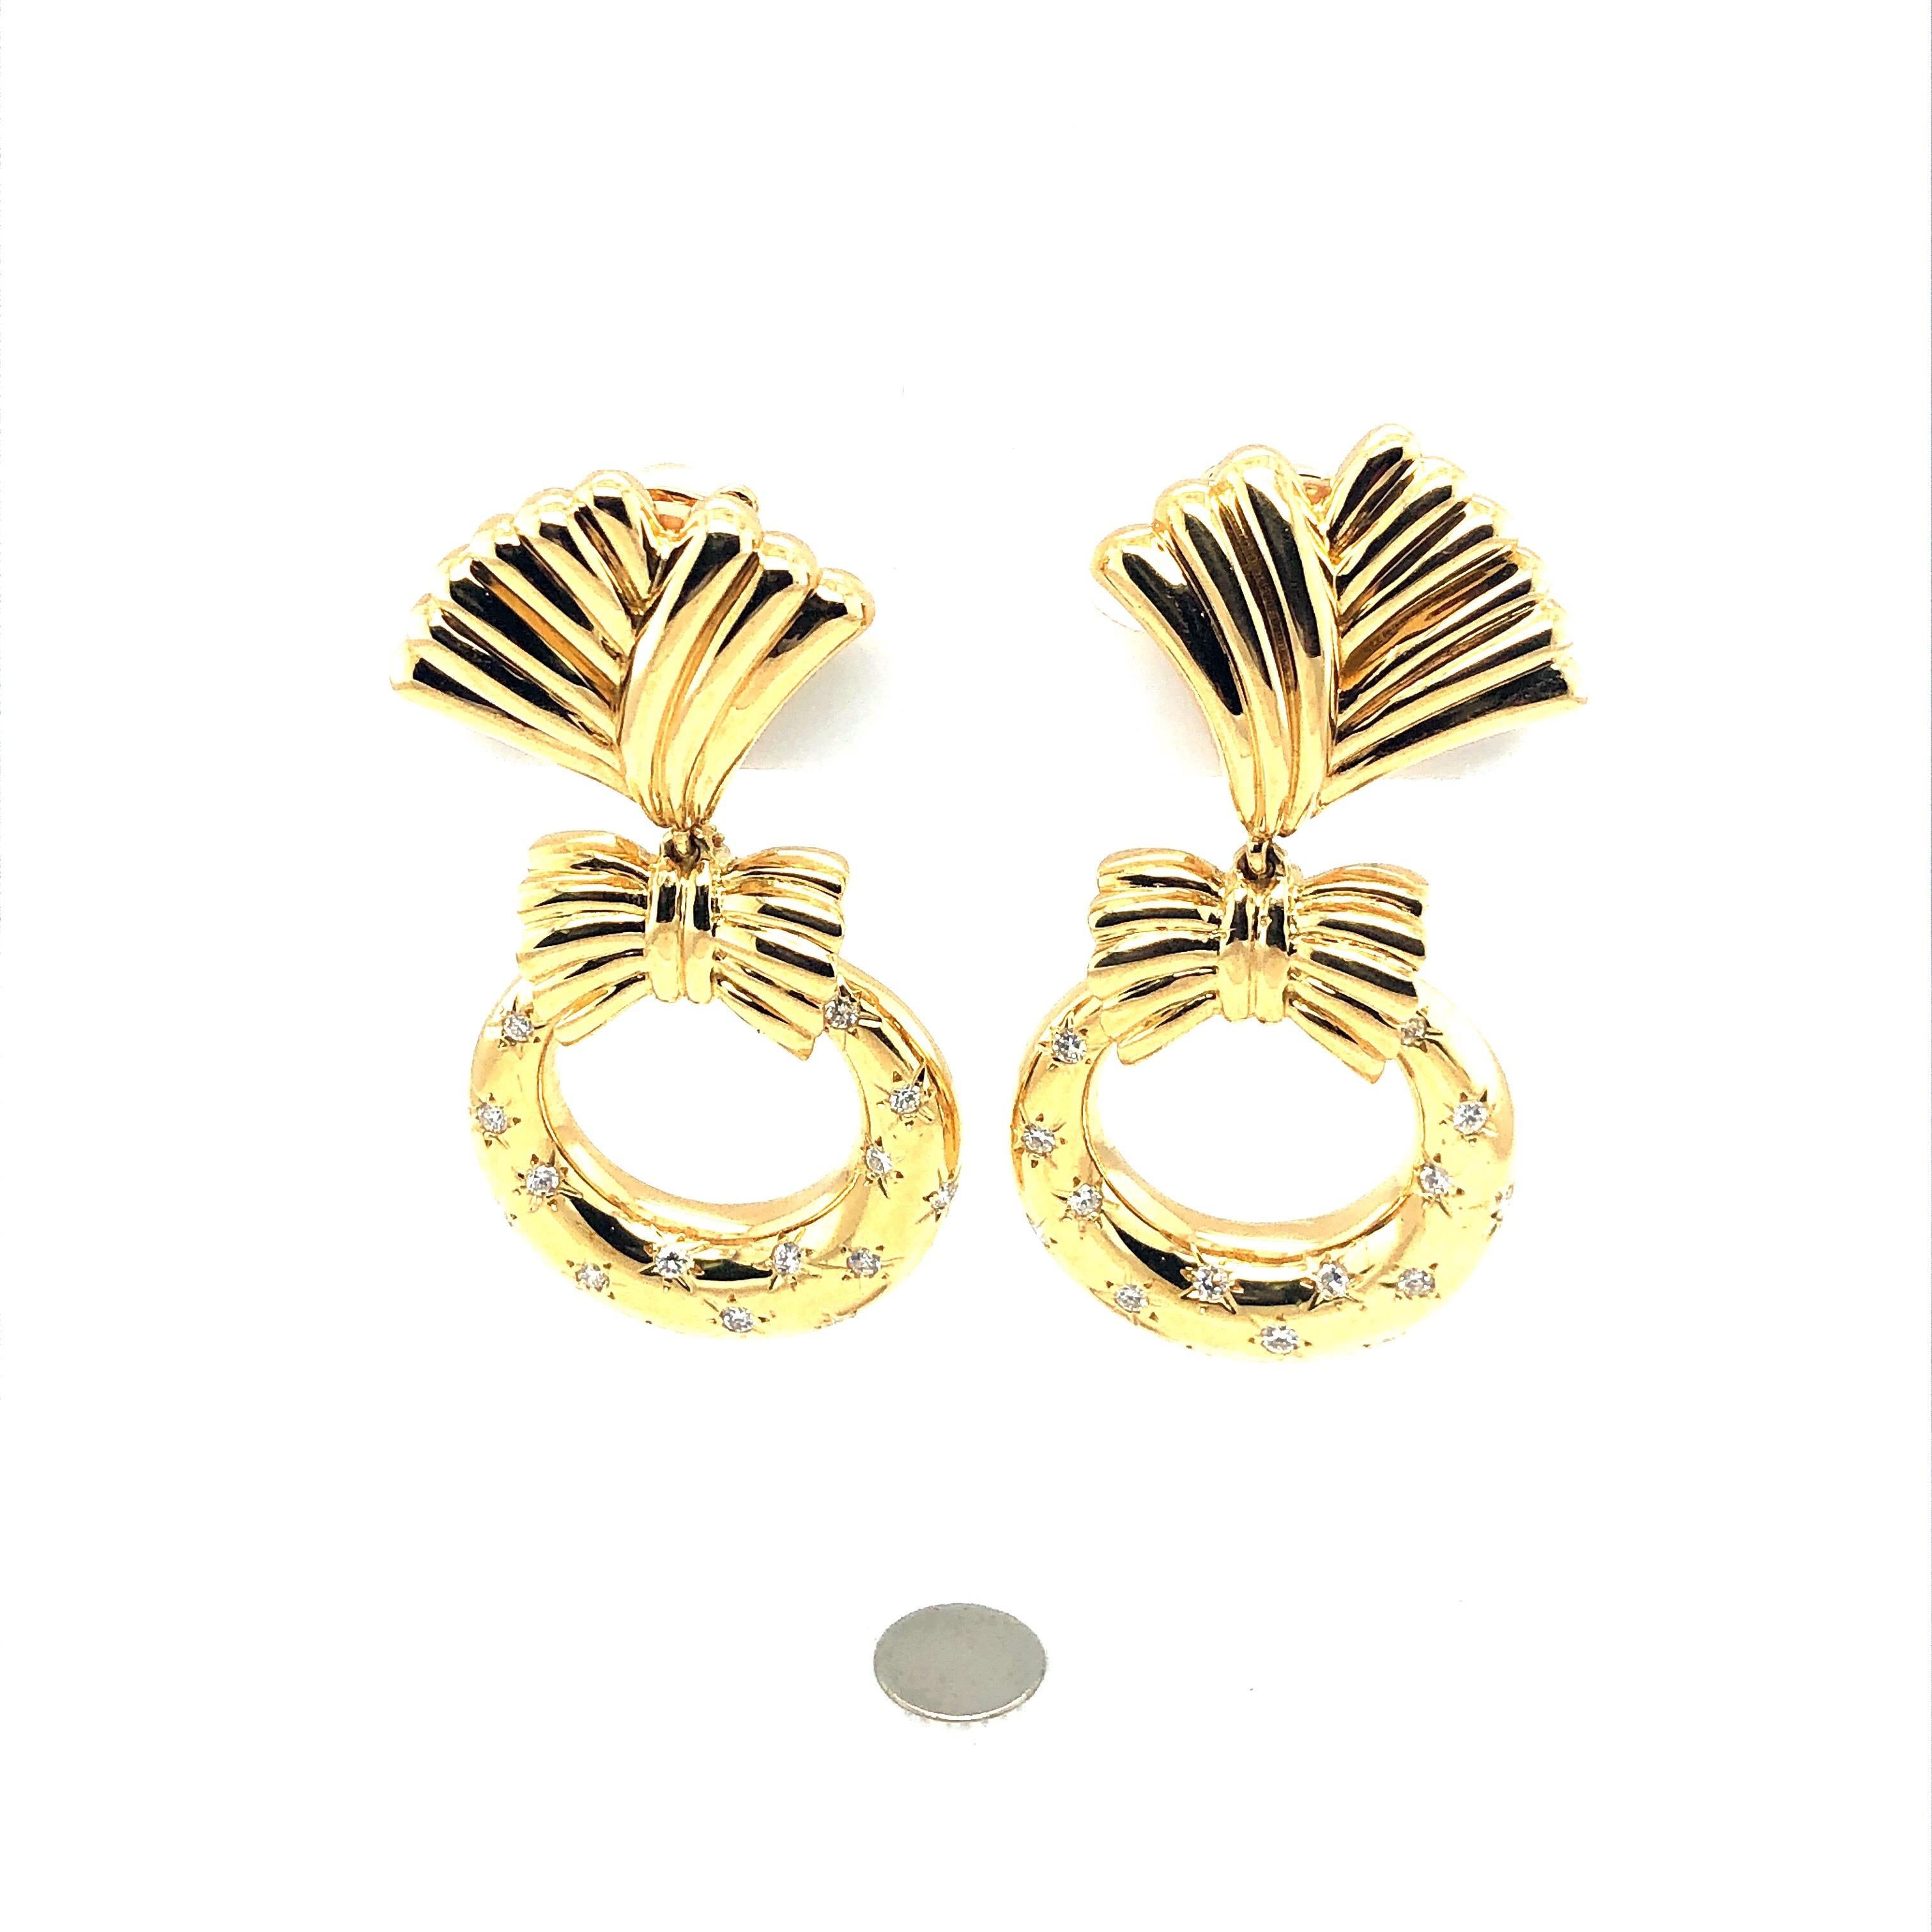 Round Cut Van Cleef & Arpels Clip-On Yellow Gold Vintage Earrings Diamonds and Charms